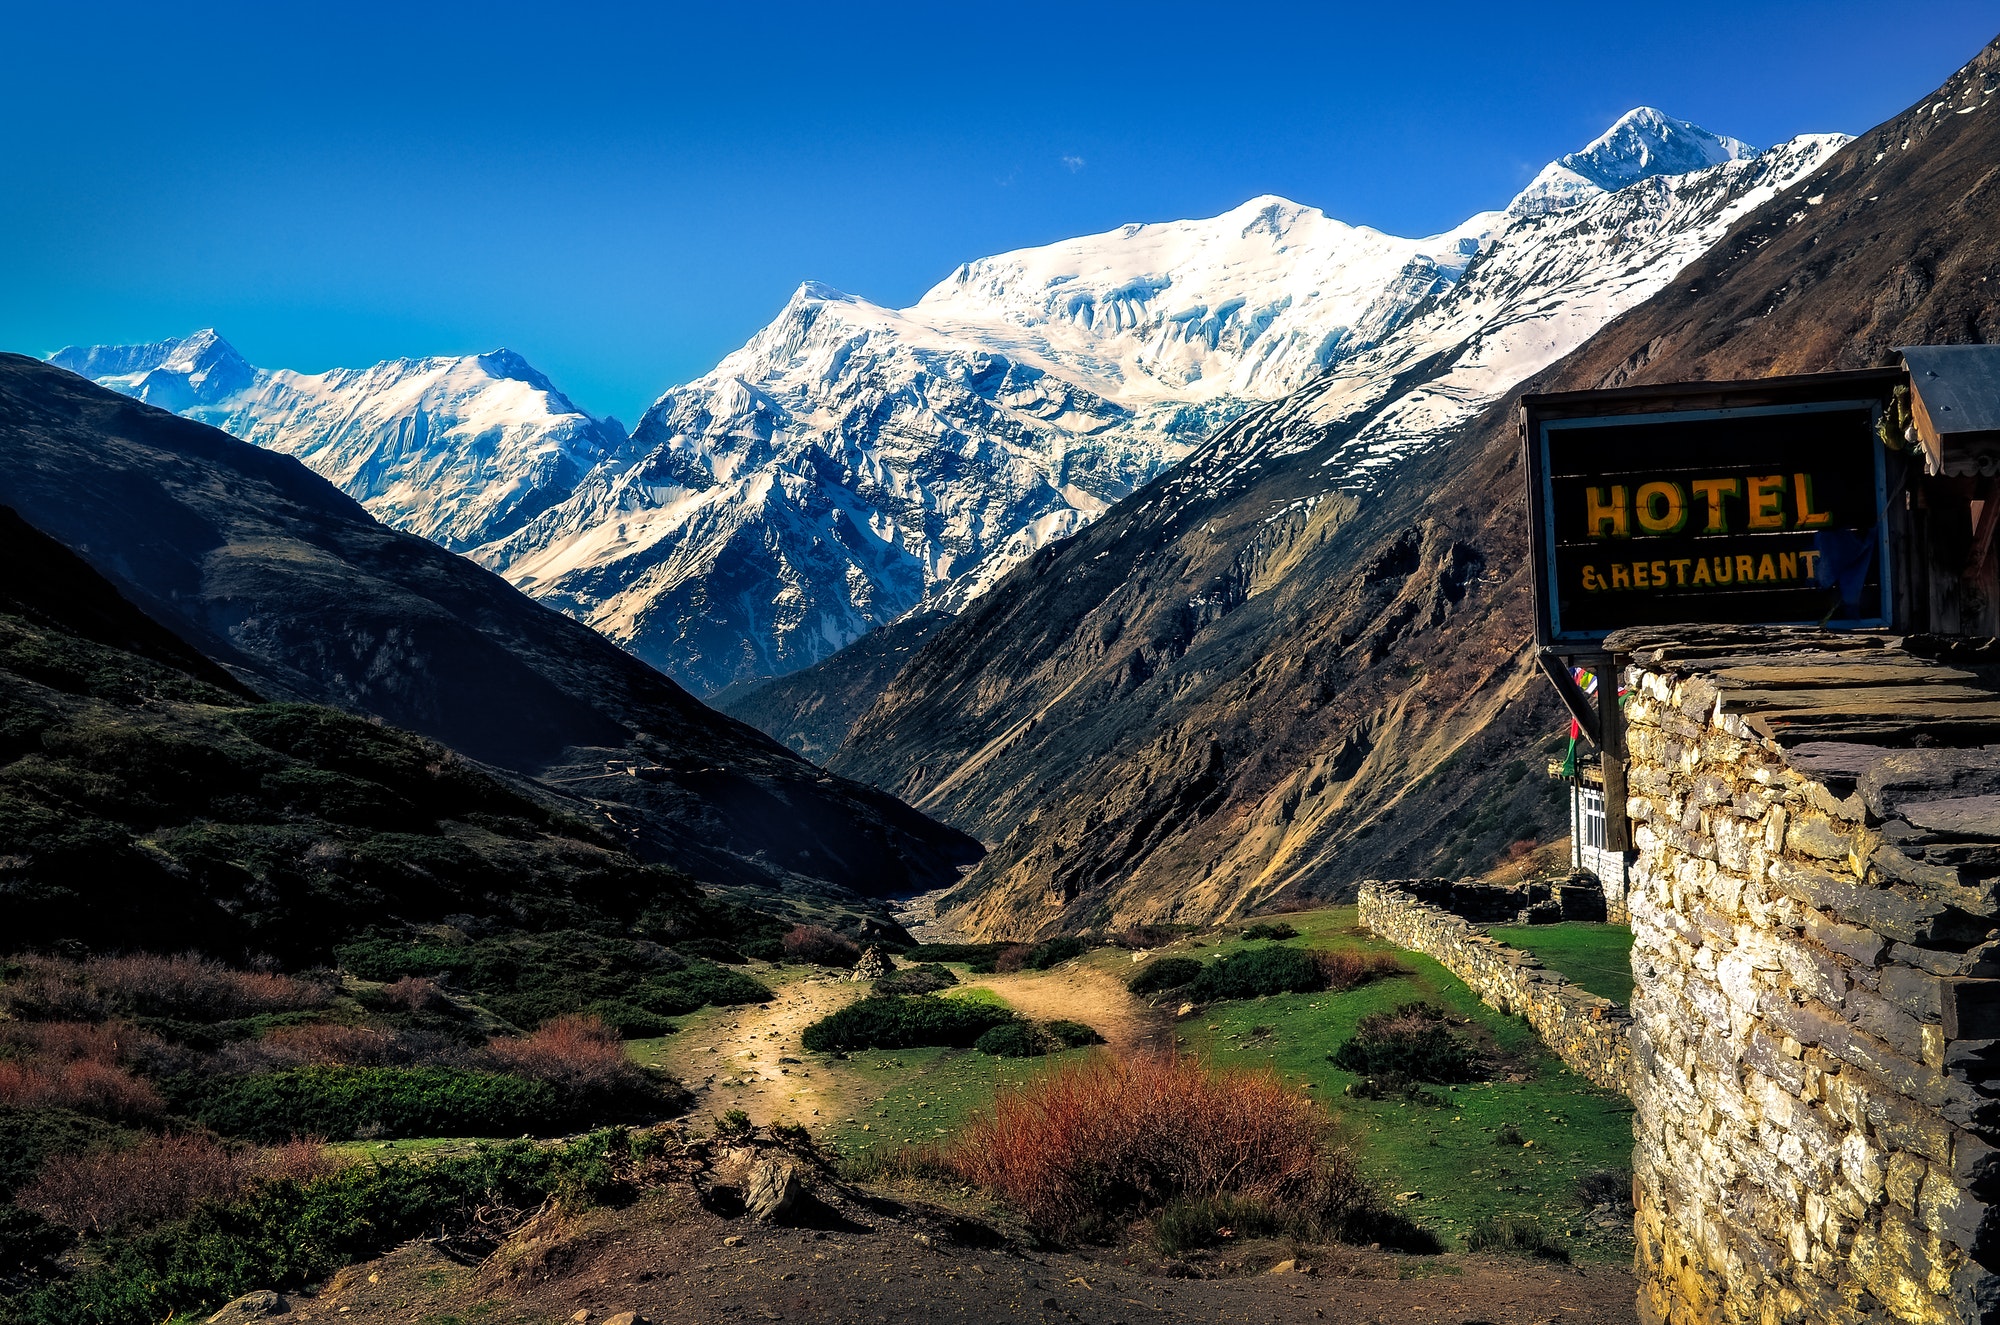 Mountain landscape view with local stone hut and hotel sign, Himalayas